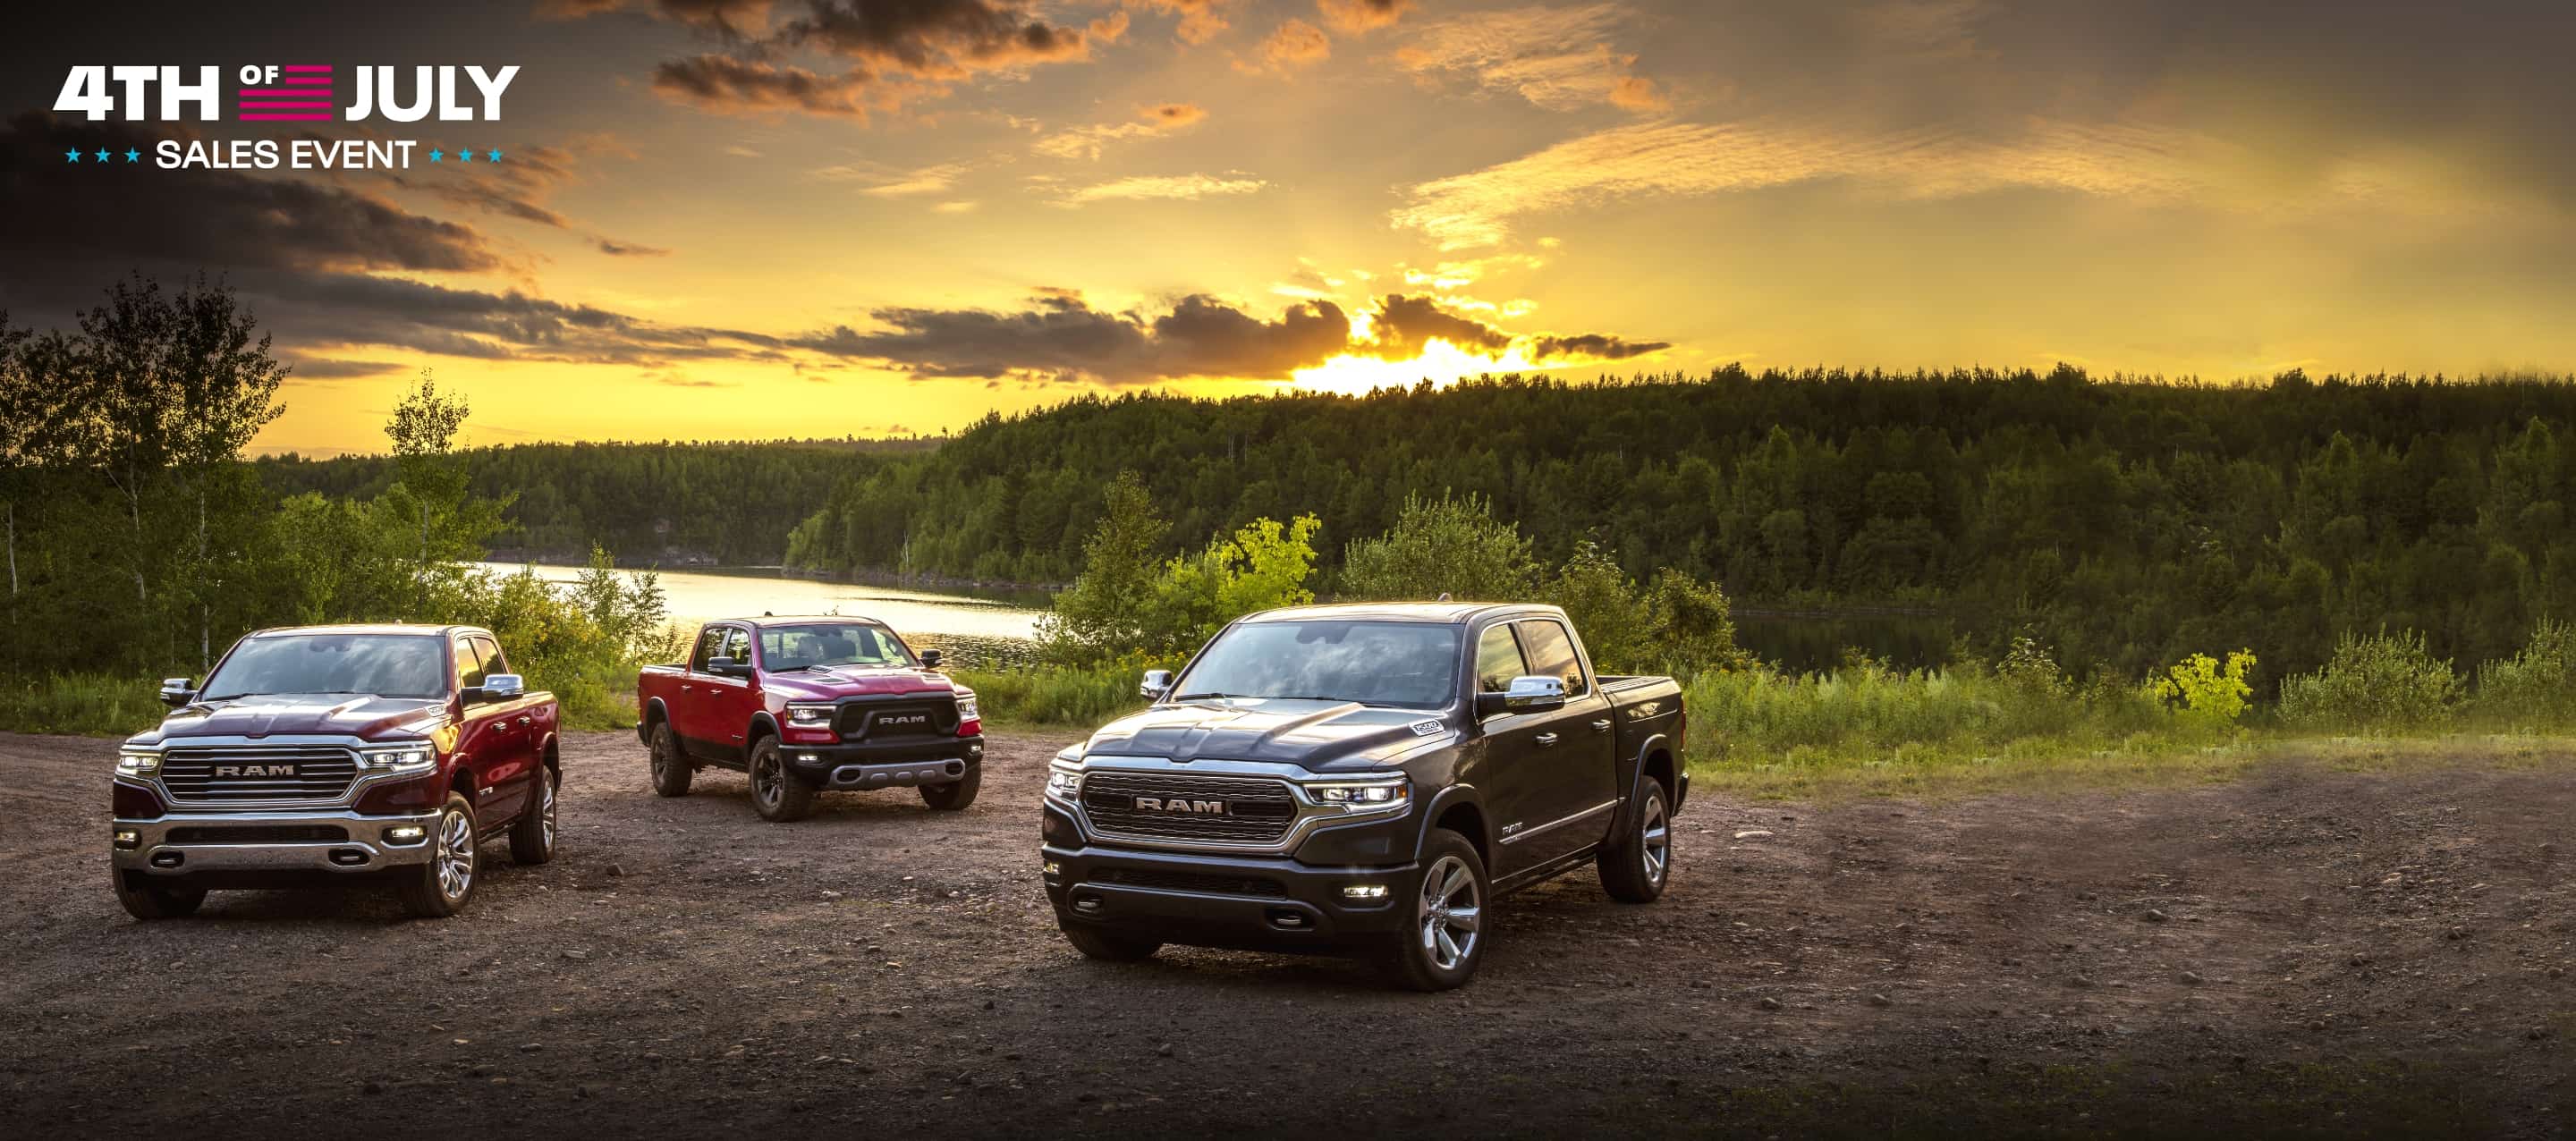 Three 2021 Ram 1500 models: a Limited Longhorn, Rebel and Limited parked beside a lake with the sun rising over a forest of trees in the background. Fourth of July Sales Event logo.